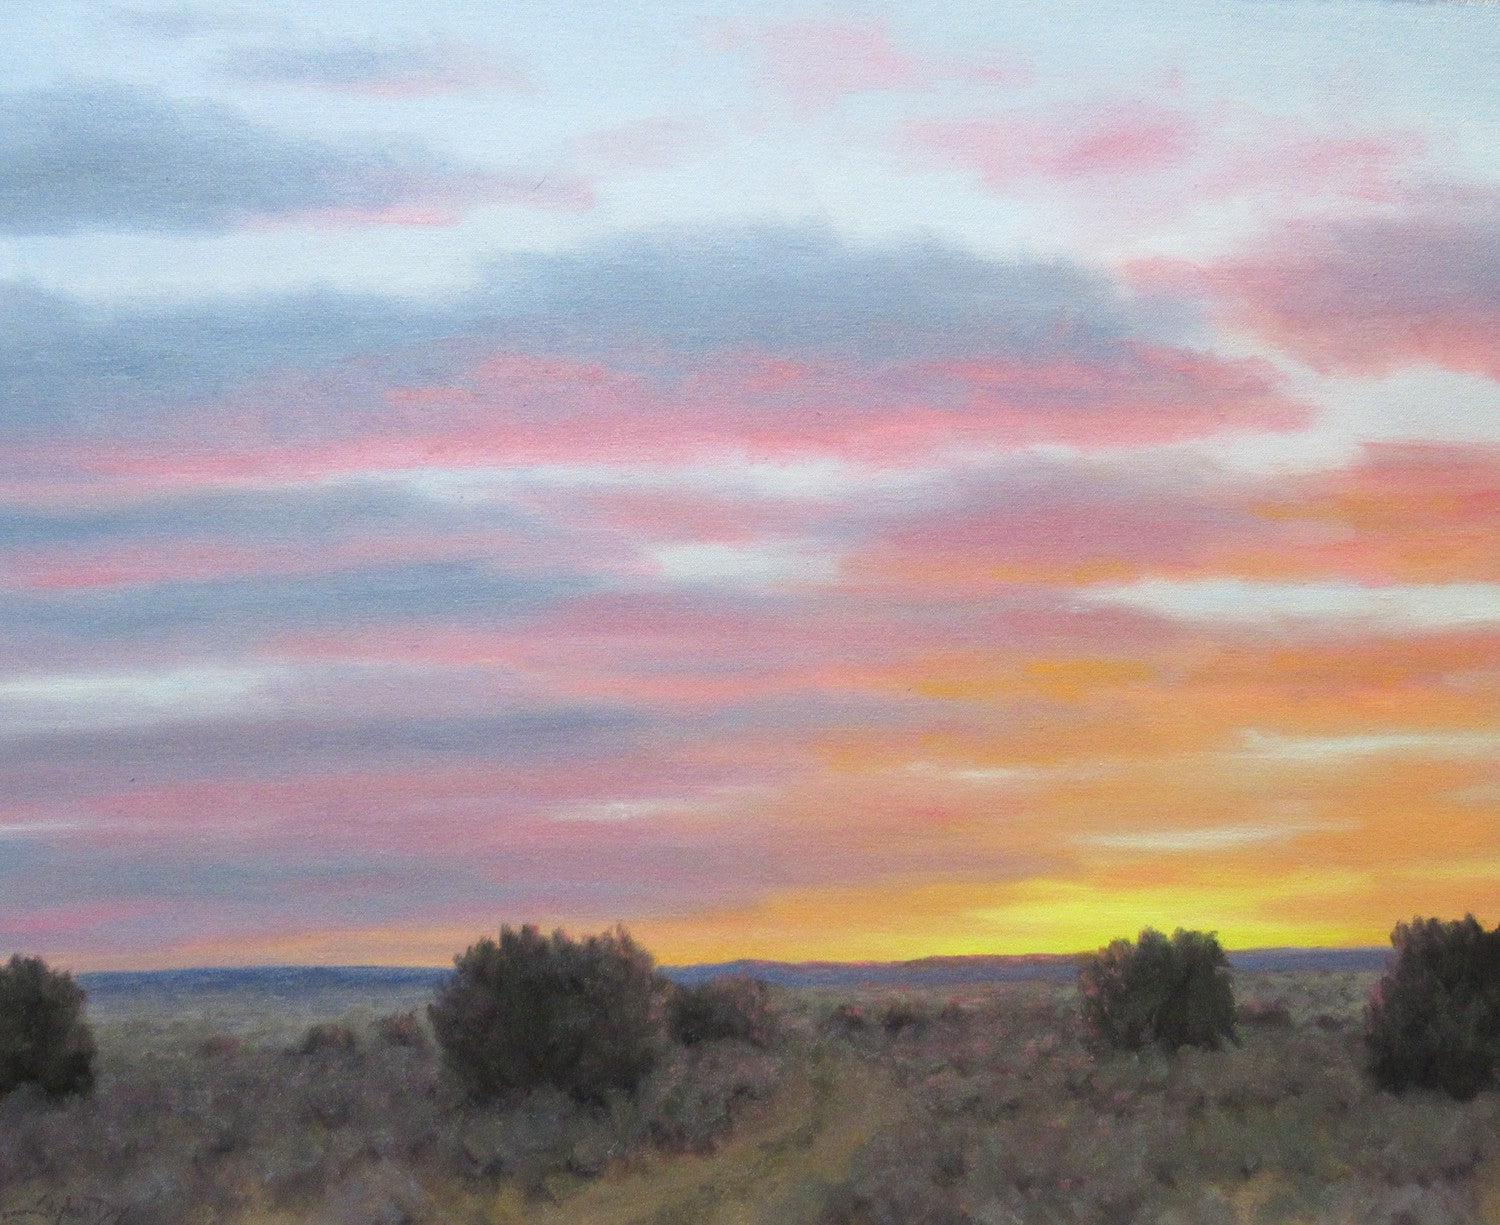 A Soft Sunset Sky-painting-Stephen Day-Sorrel Sky Gallery